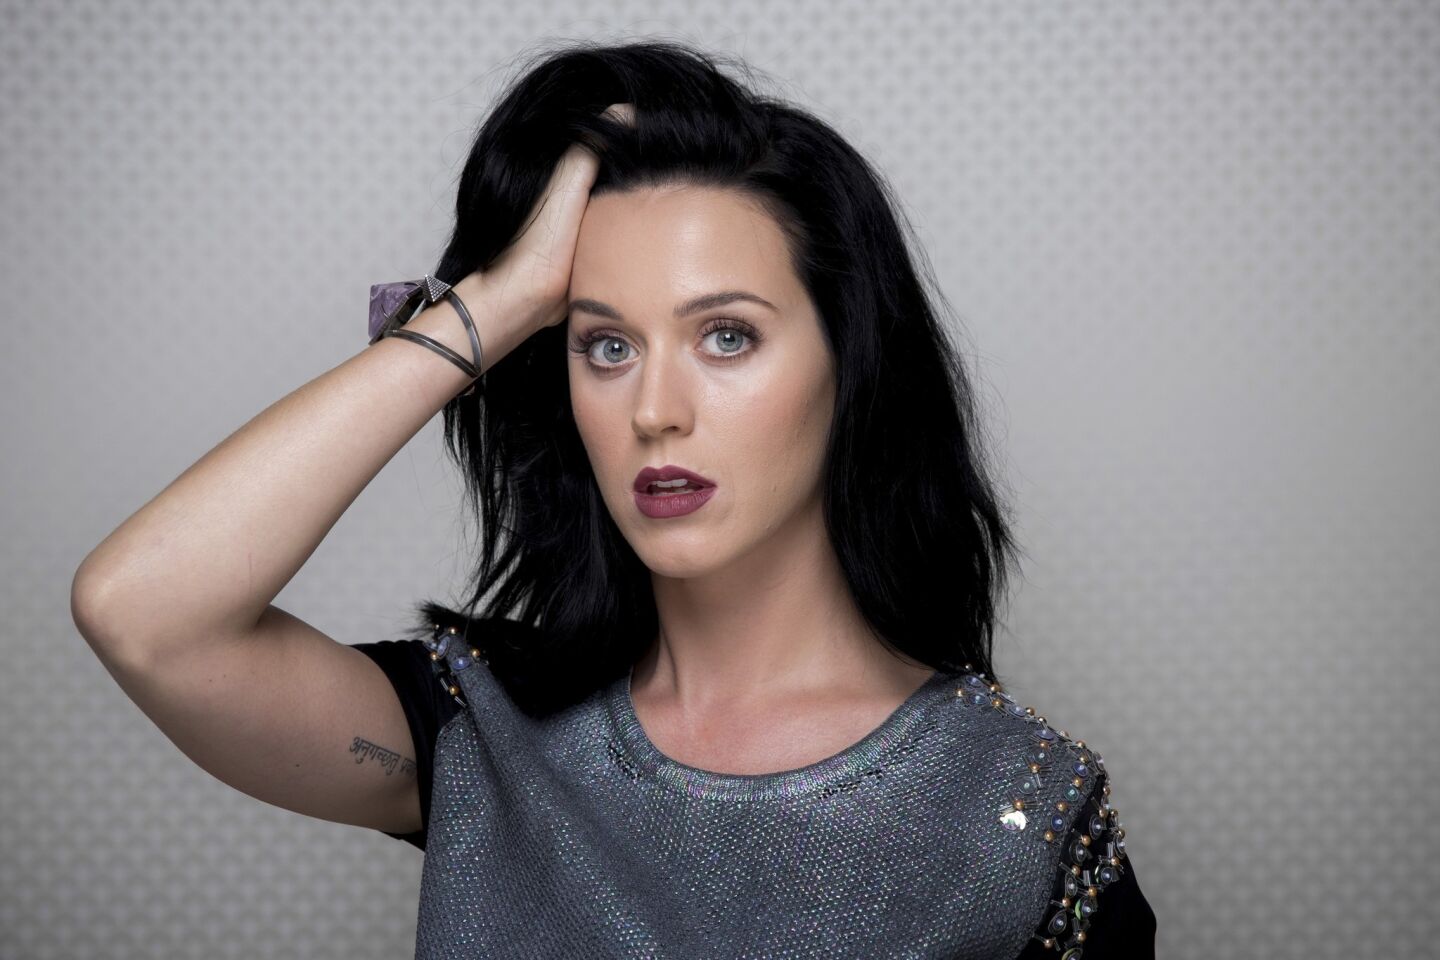 Katy Perry's new album, "Prism," reflects a new maturity culled from a tumultuous few years.